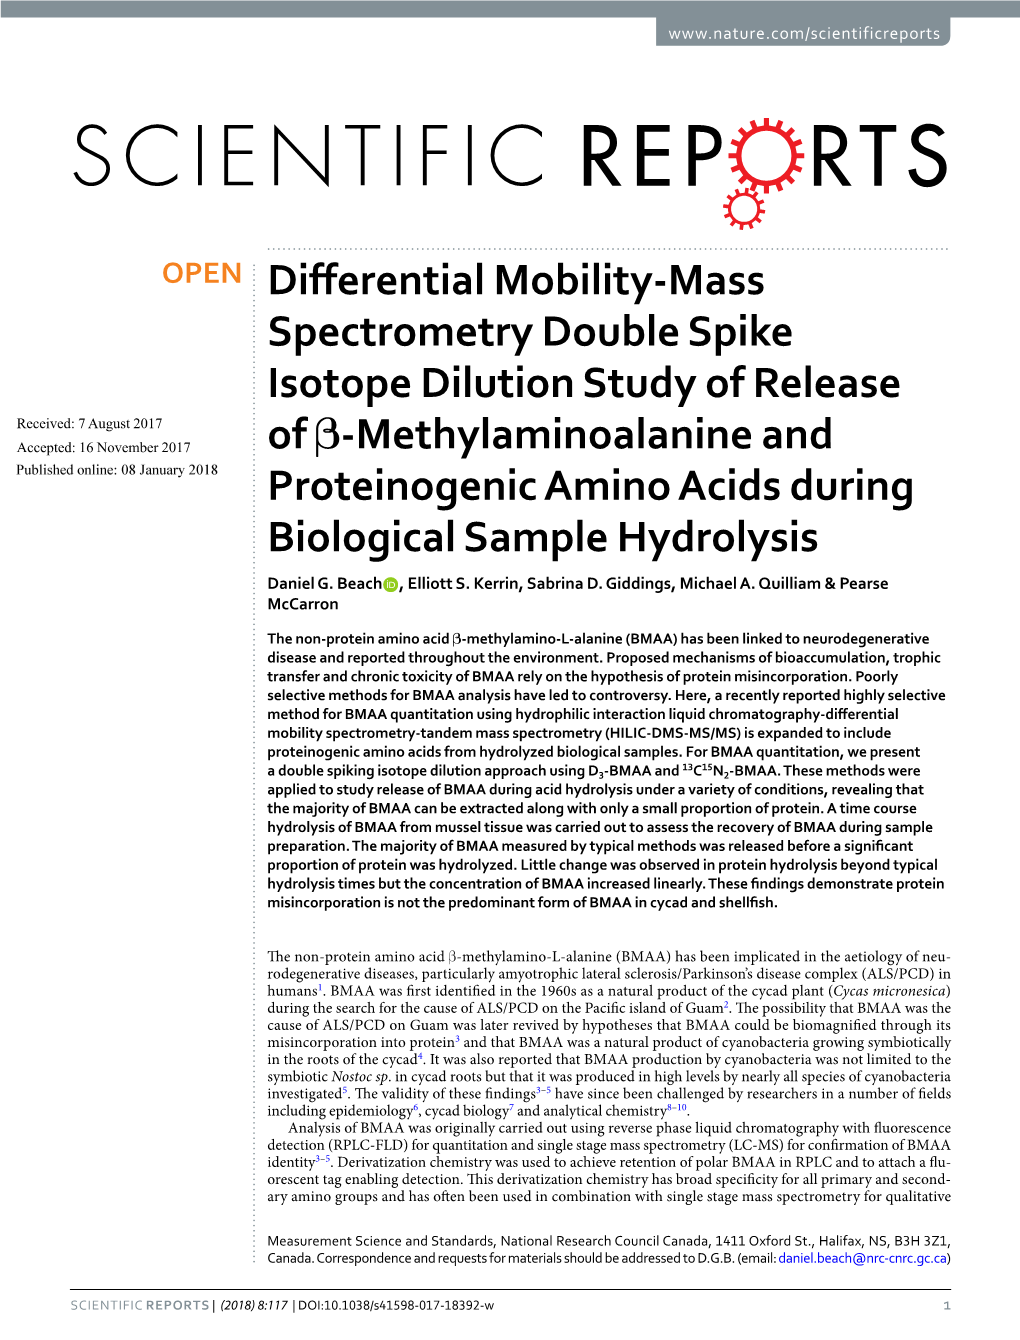 Differential Mobility-Mass Spectrometry Double Spike Isotope